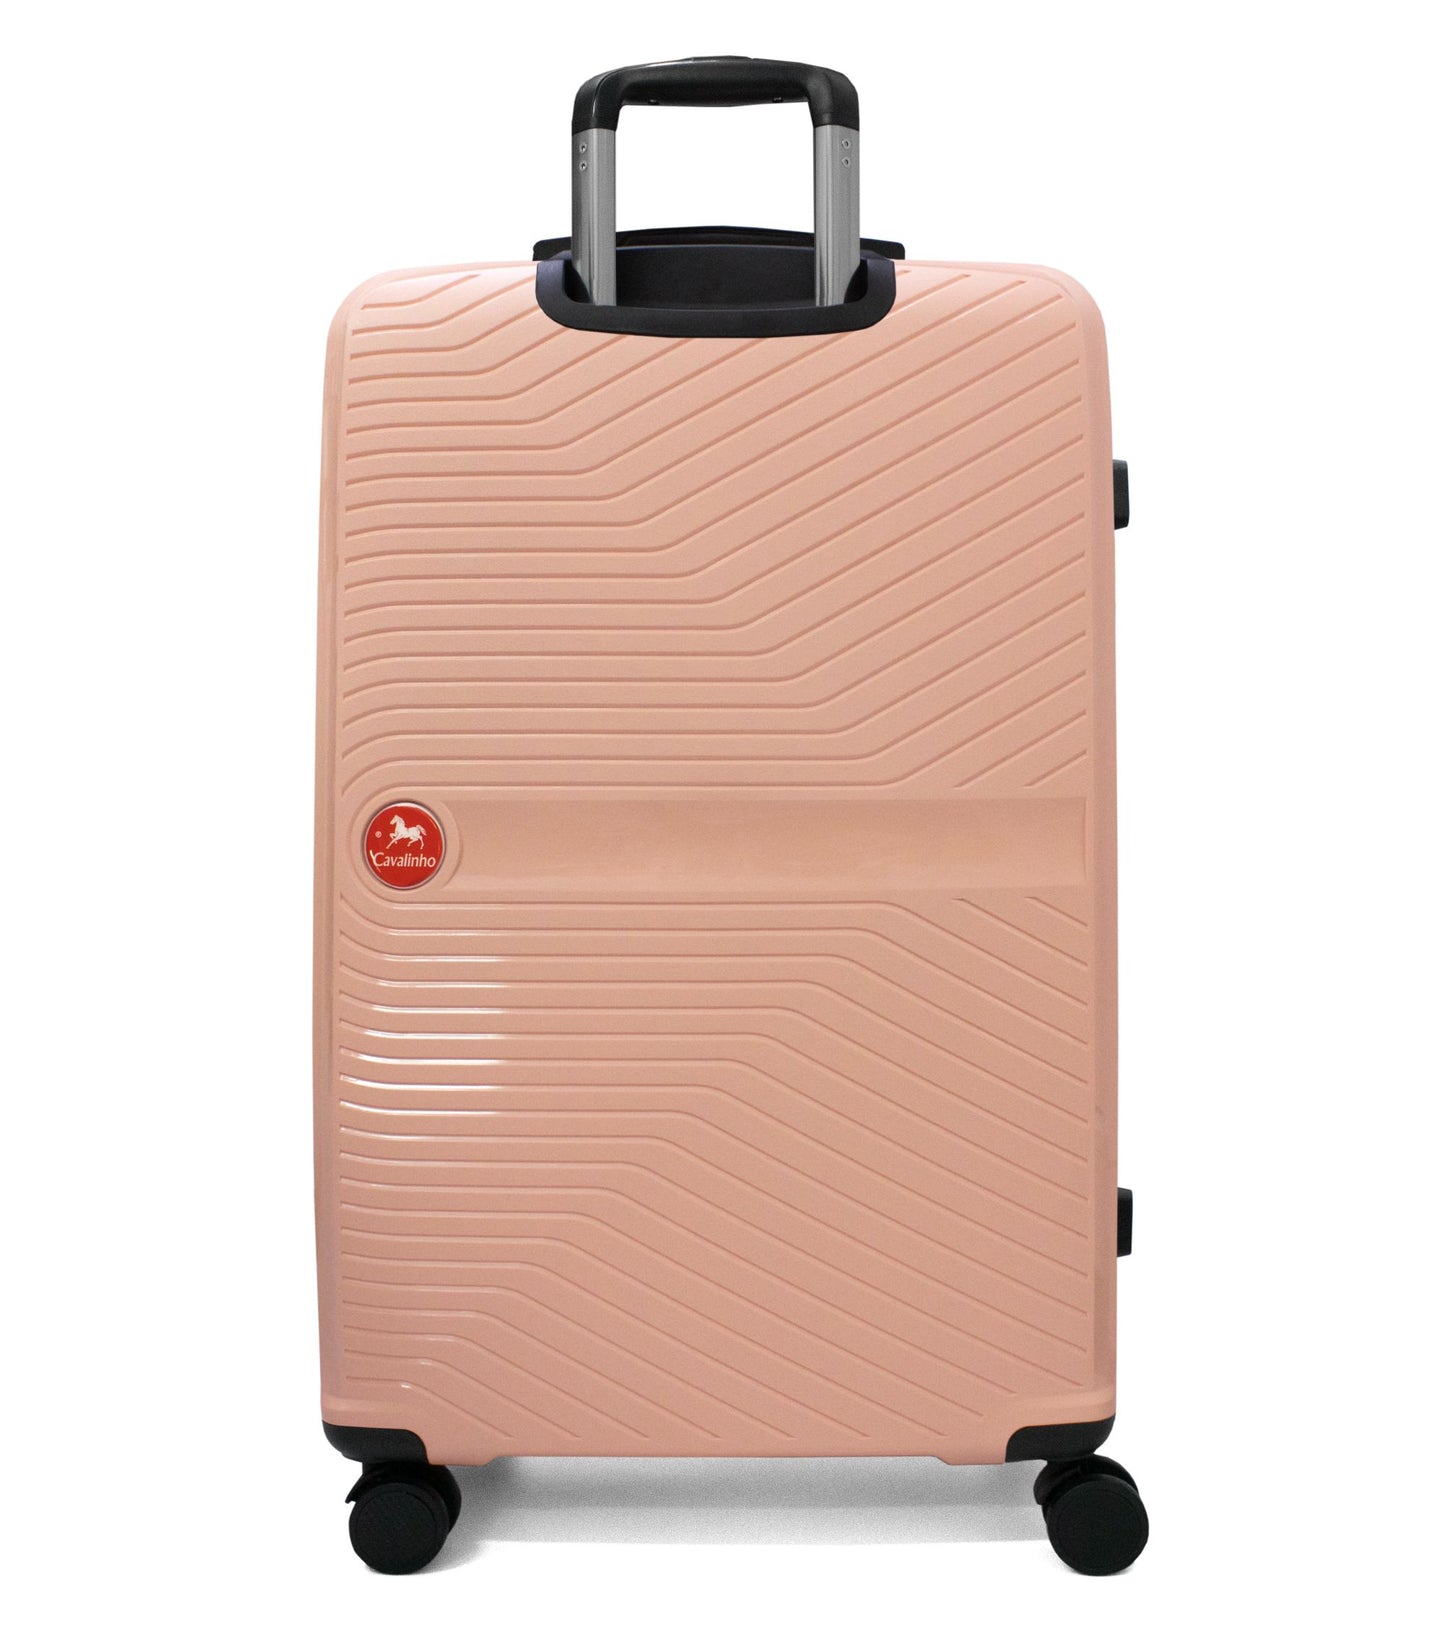 Cavalinho Colorful Check-in Hardside Luggage (28") - 28 inch Salmon - 68020004.11.28_3